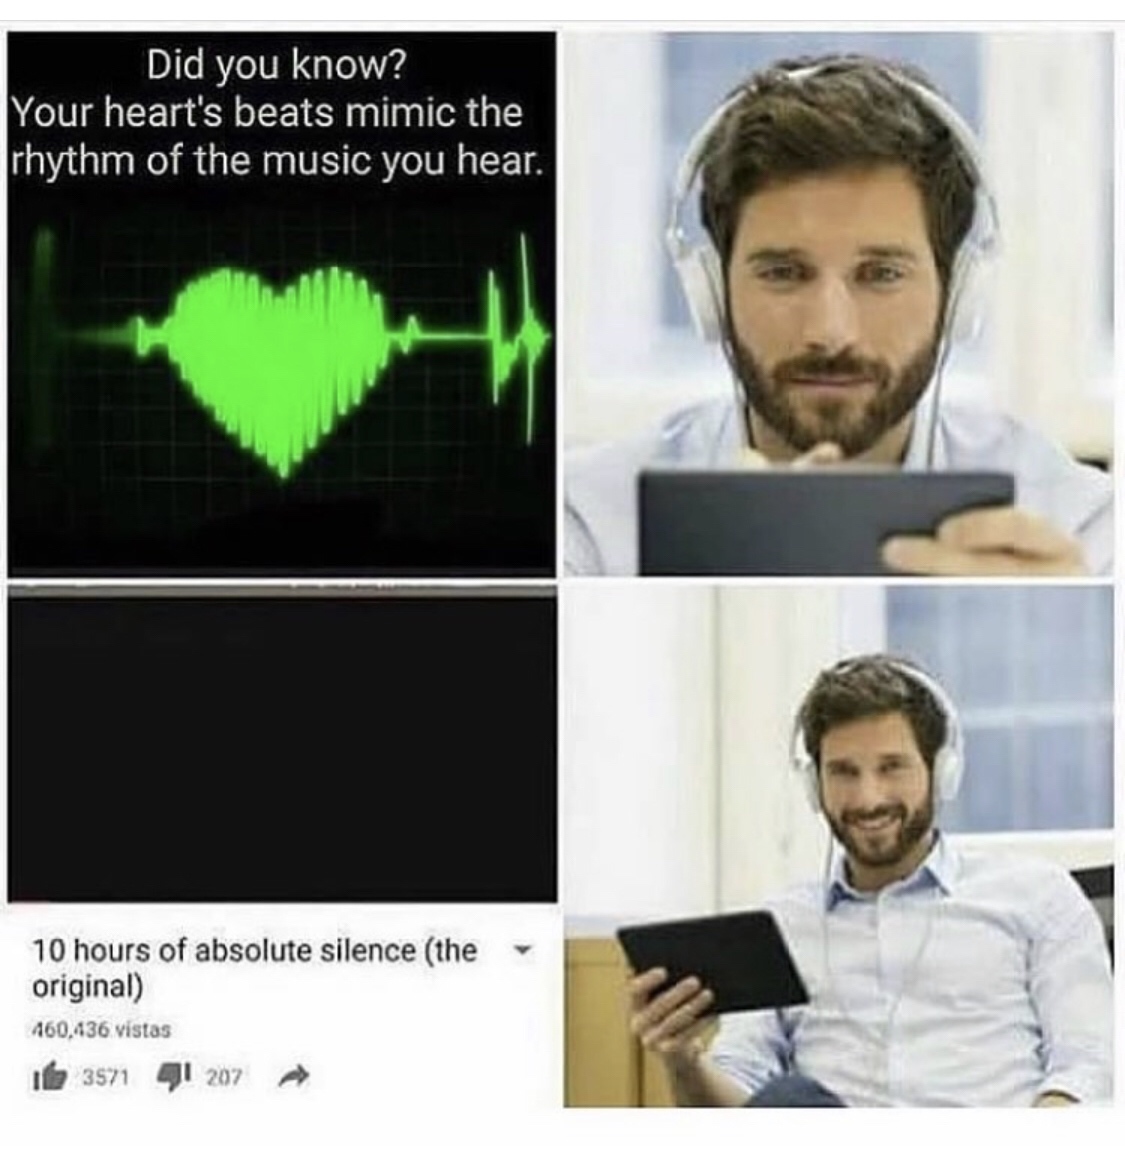 cool pics and memes - absolute silence meme - Did you know? Your heart's beats mimic the rhythm of the music you hear. 10 hours of absolute silence the original 460,436 vistas 13571 207